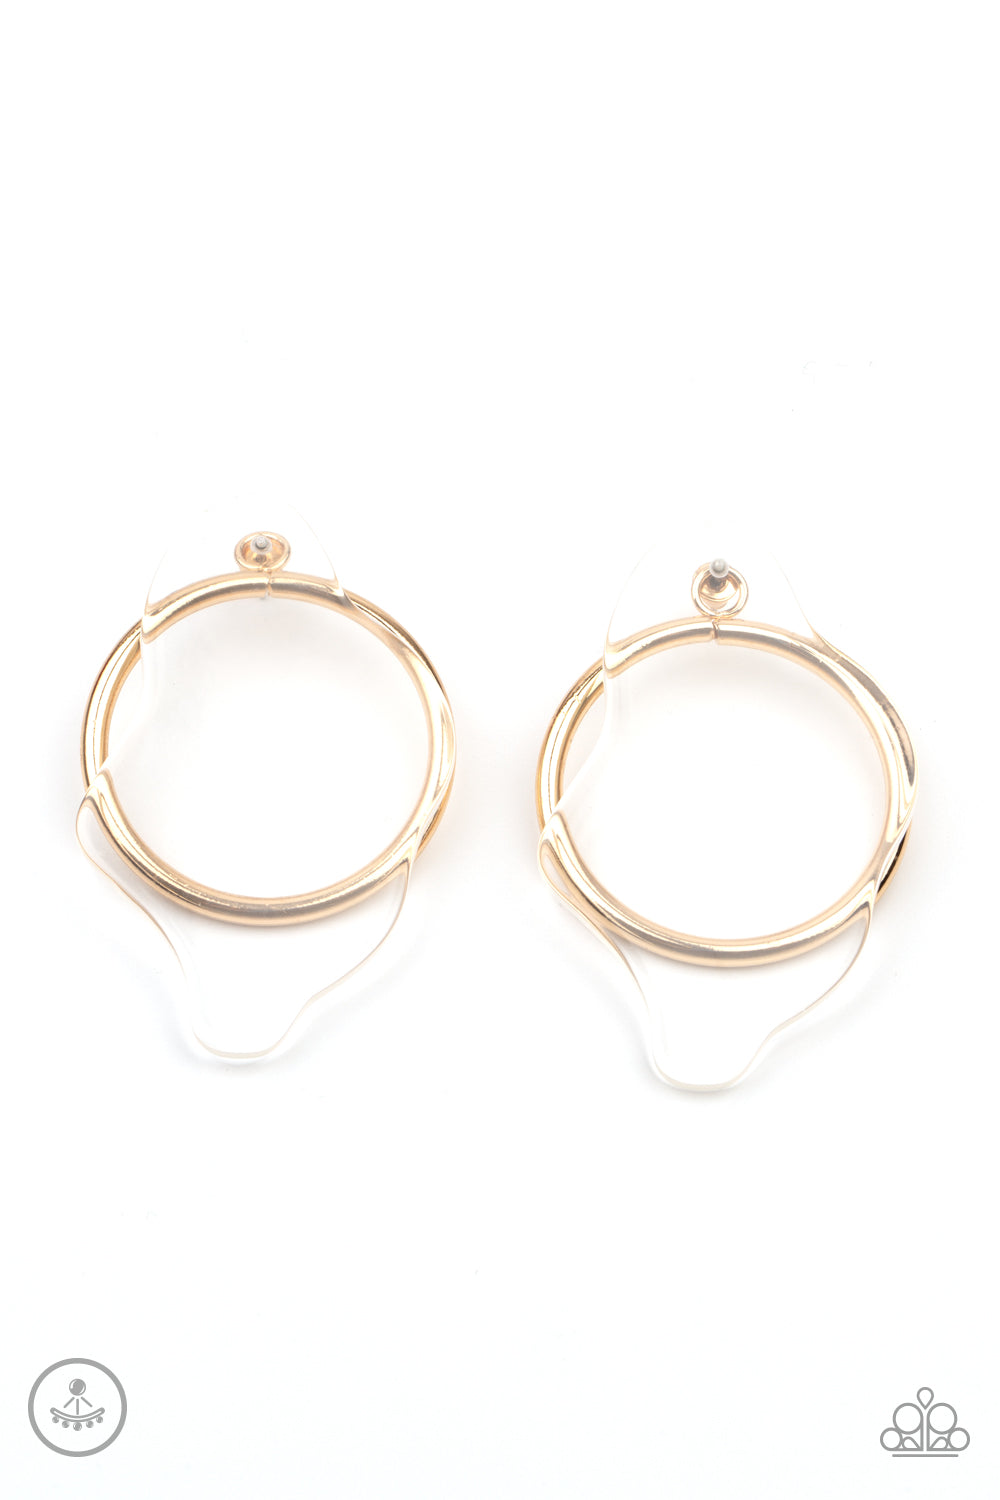 Clear The Way! - Gold  Earrings - Paparazzi Accessories - Paparazzi Accessories 